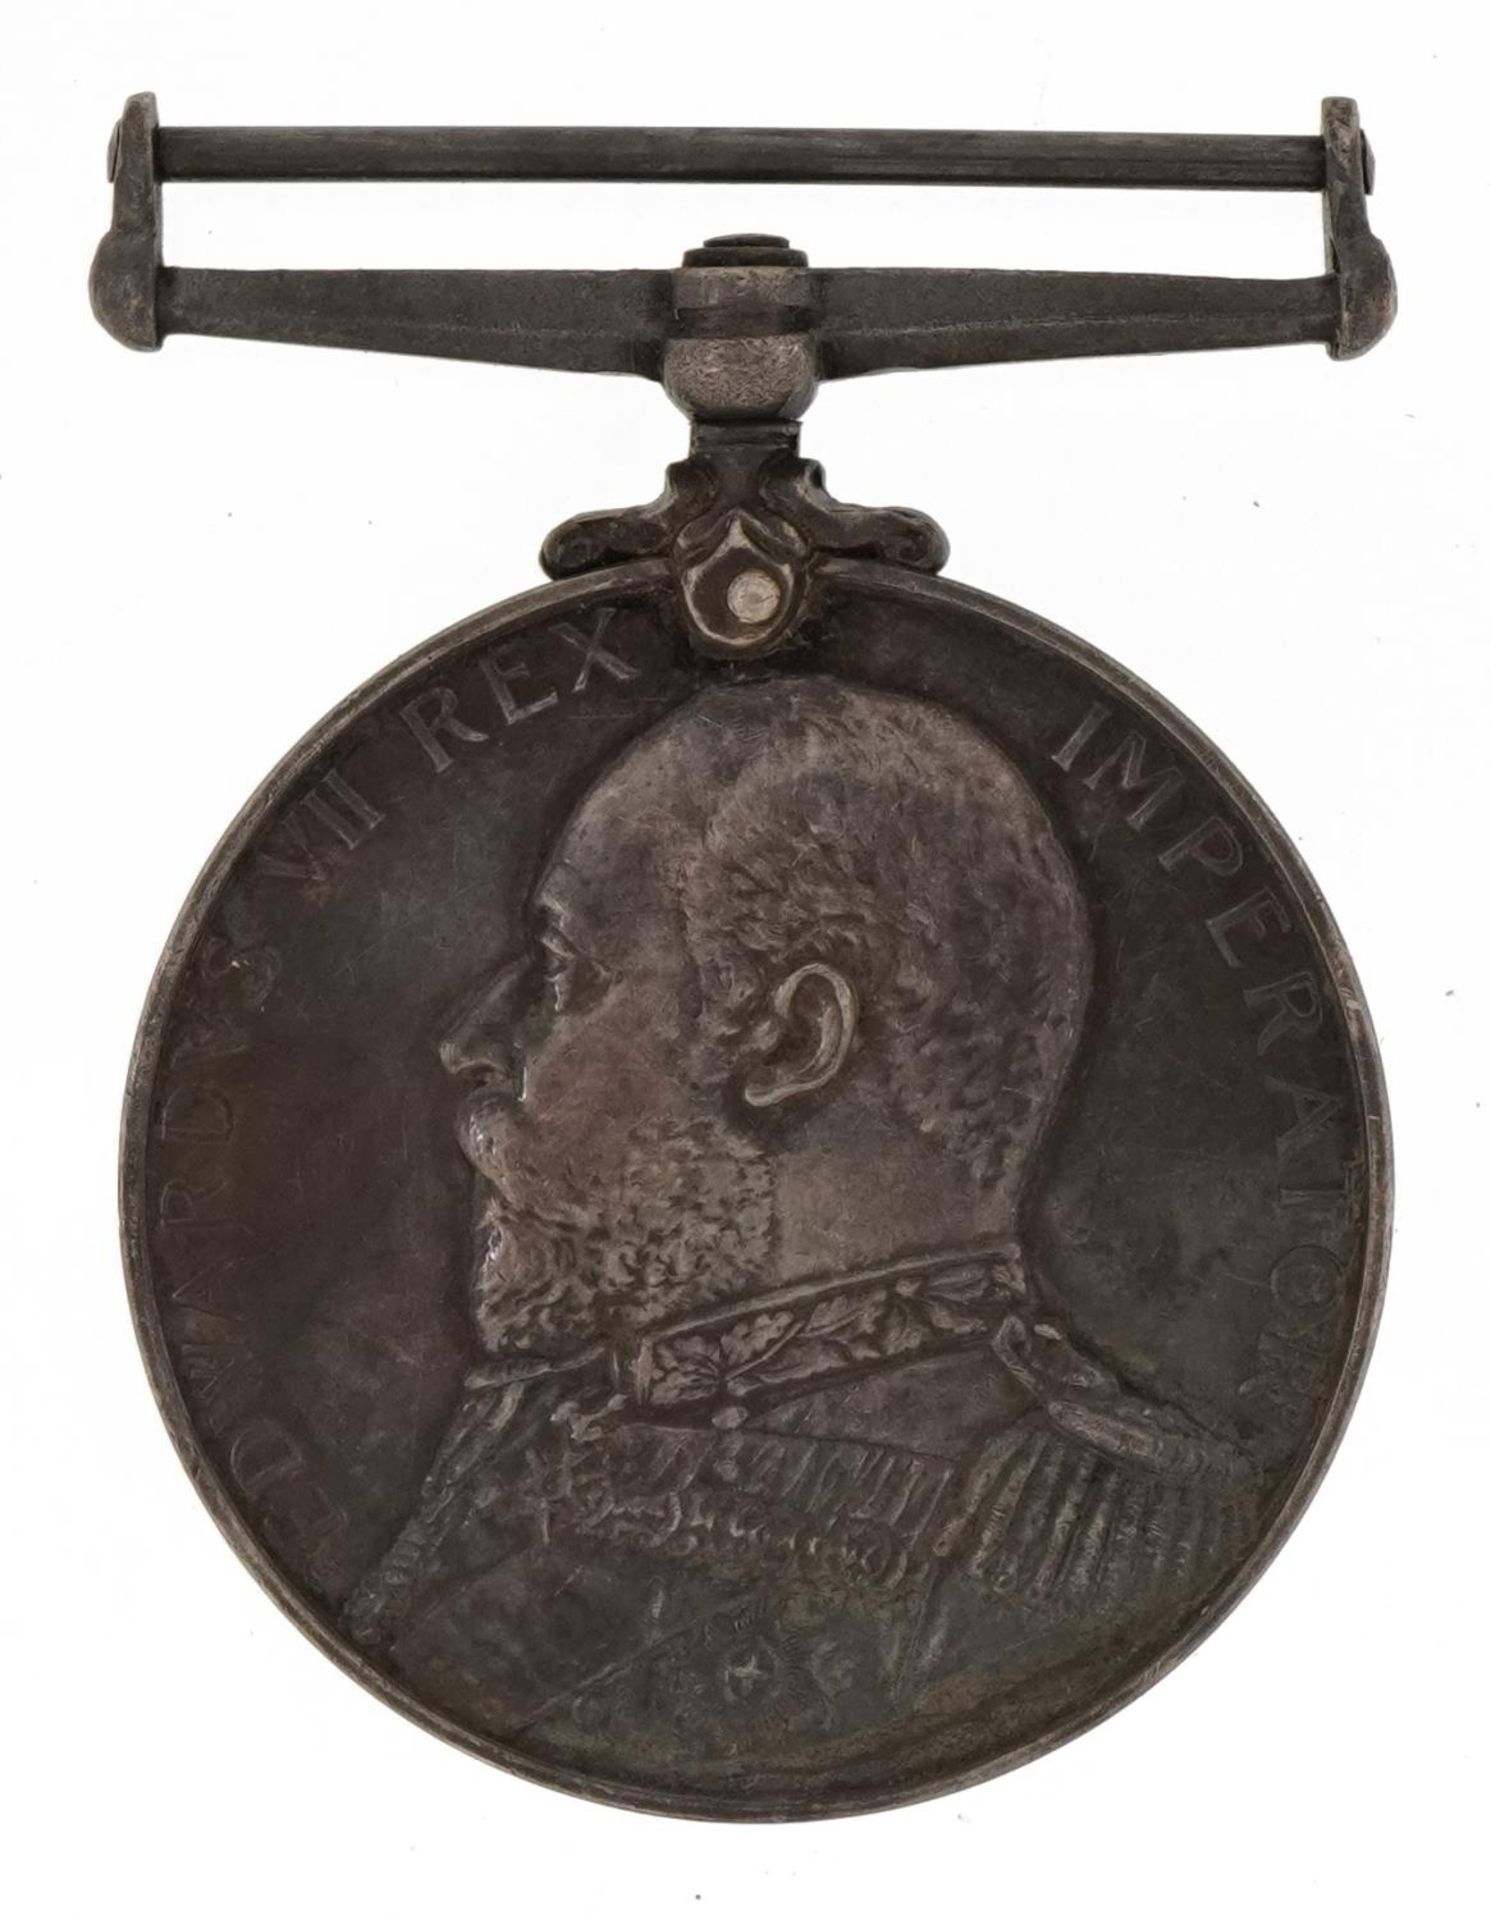 British military Edward VII naval Long Service and Good Conduct medal awarded to Edward Glanville,